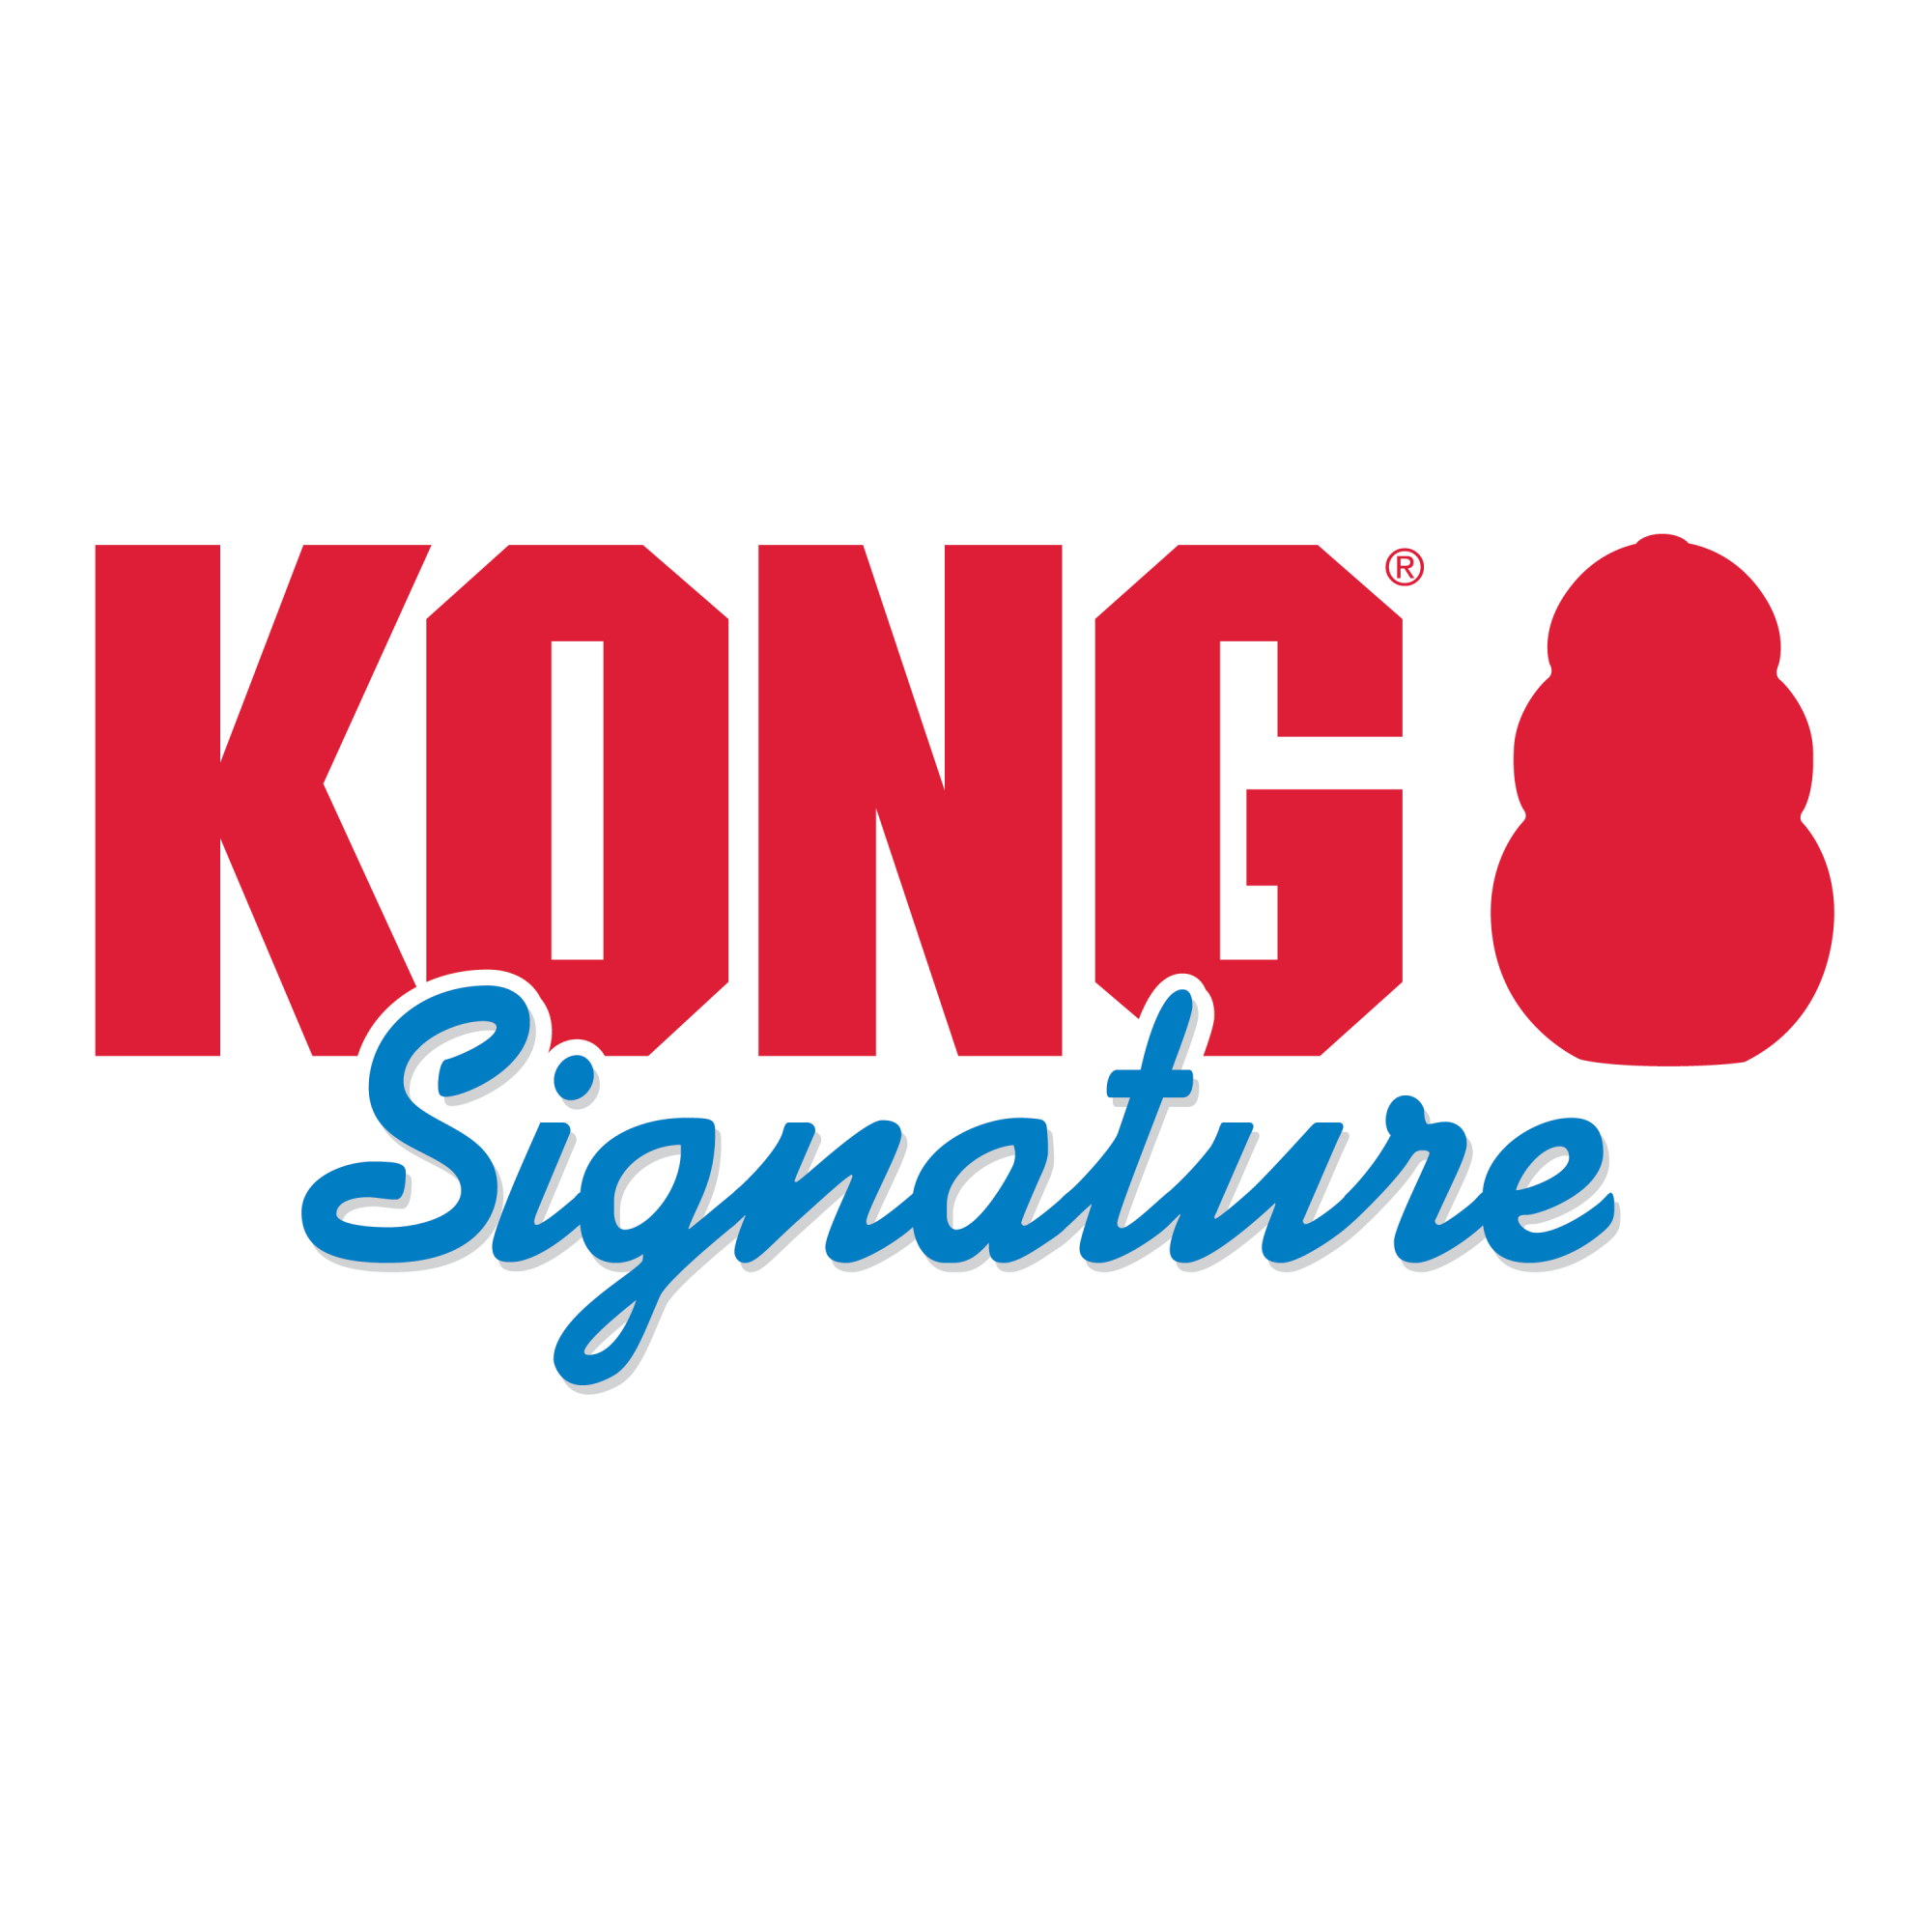 KONG Signature Dynos Hundespielzeug - Farbe je nach Lieferung